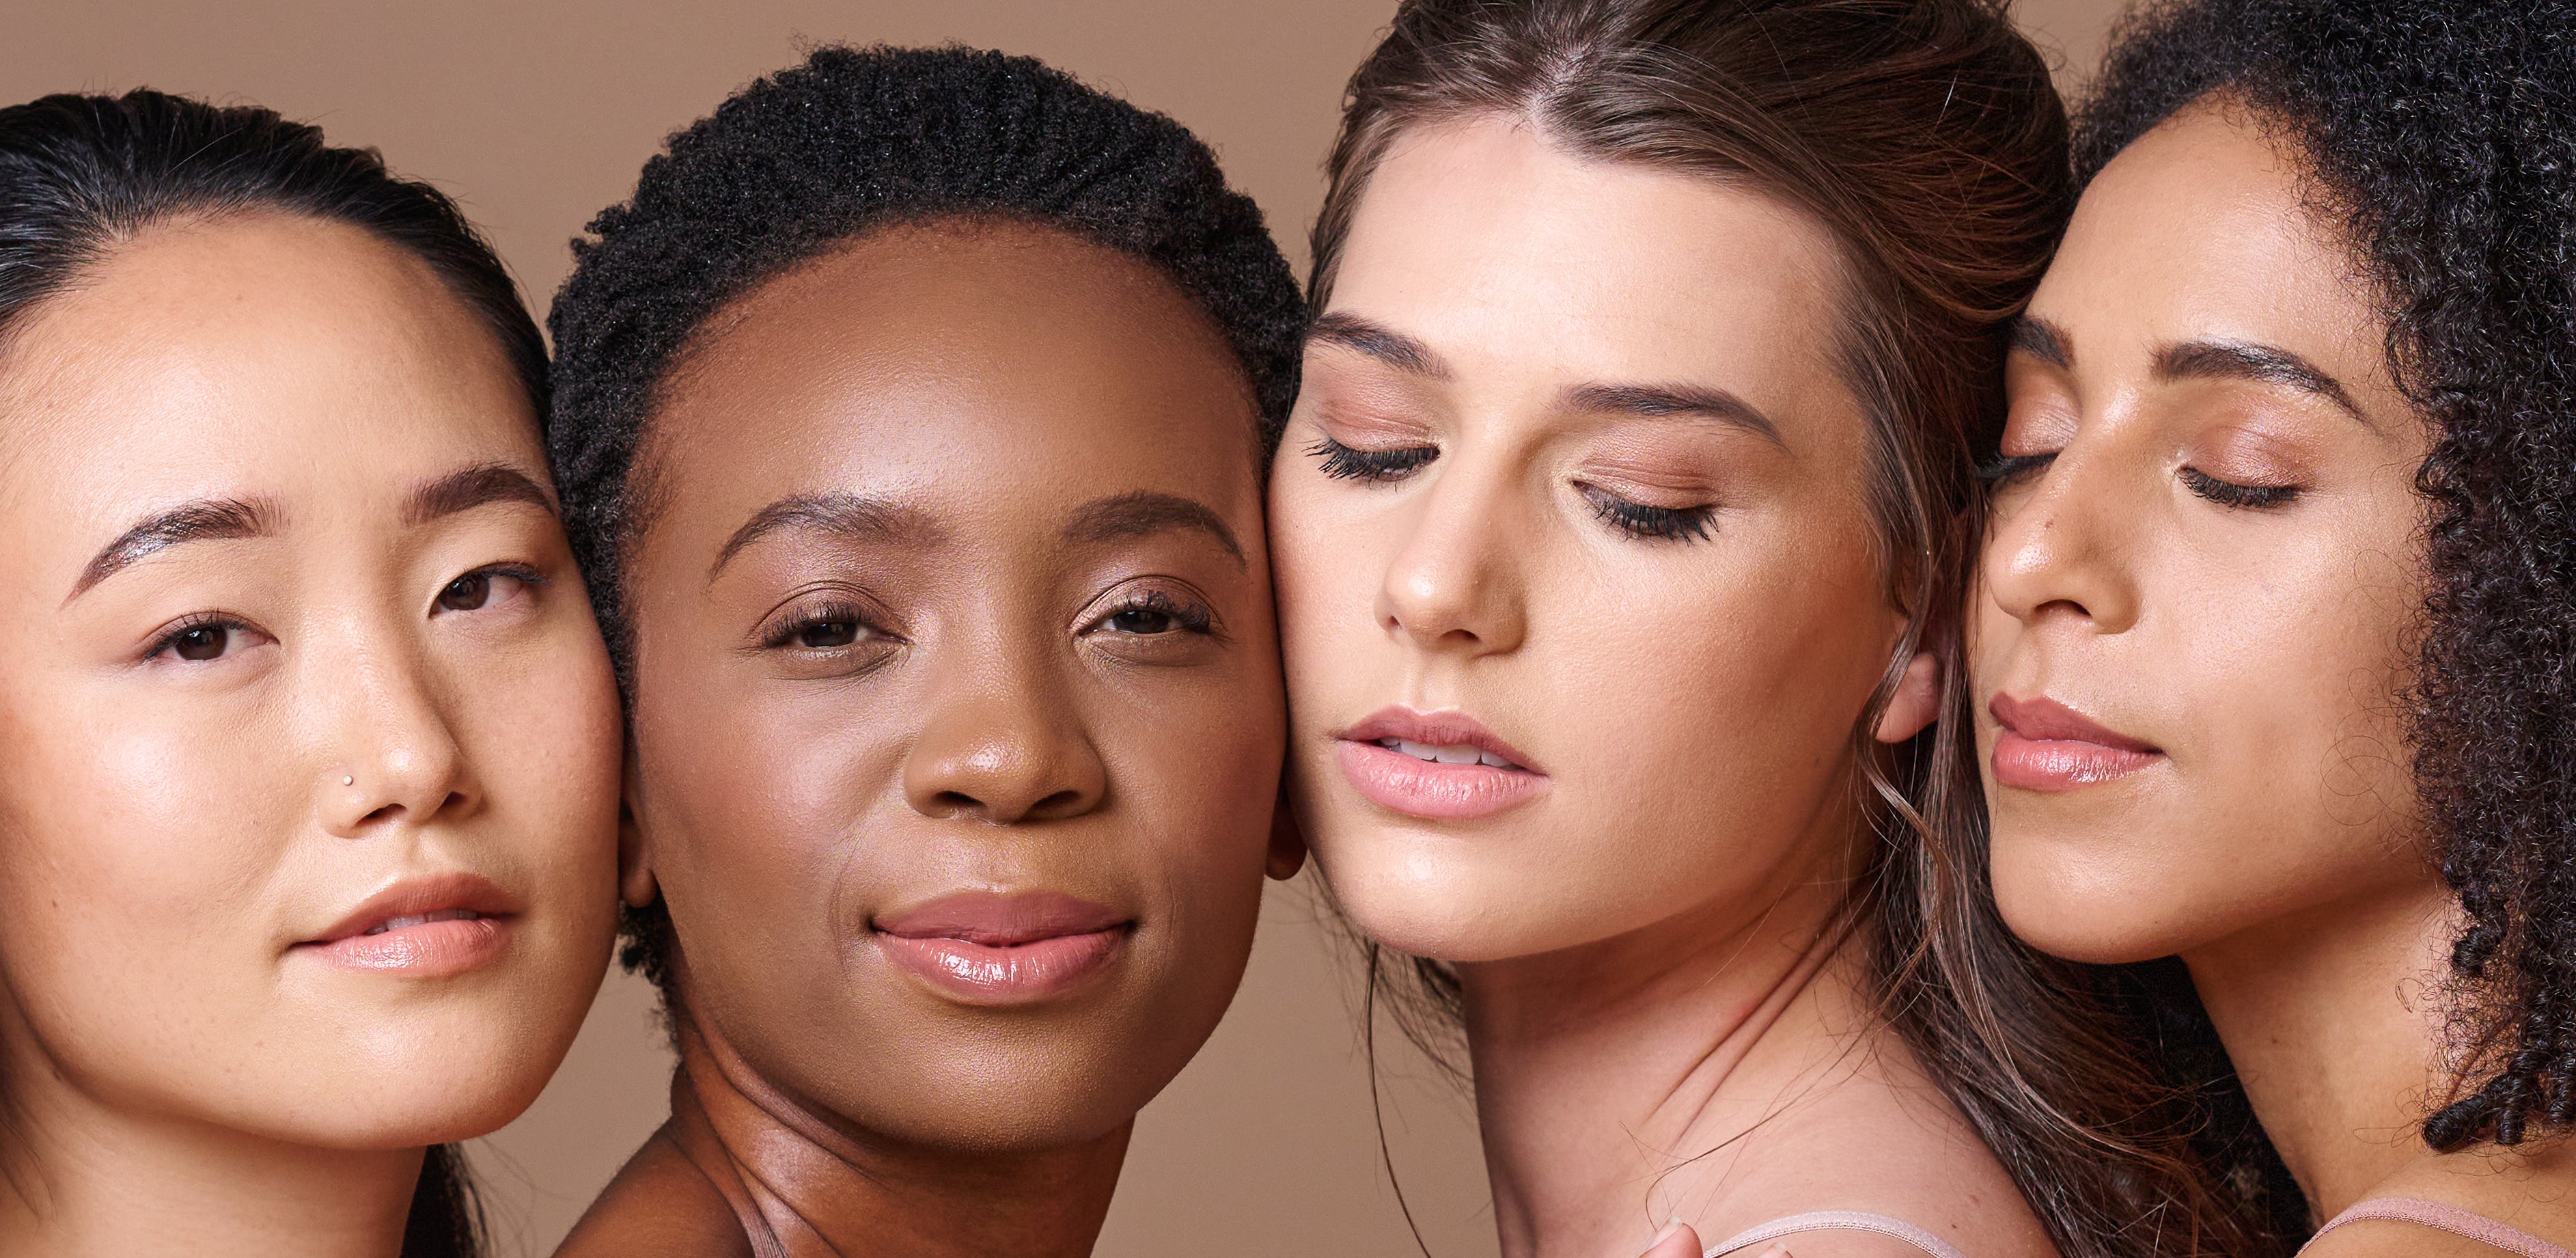 How to choose the right makeup products for your skin type